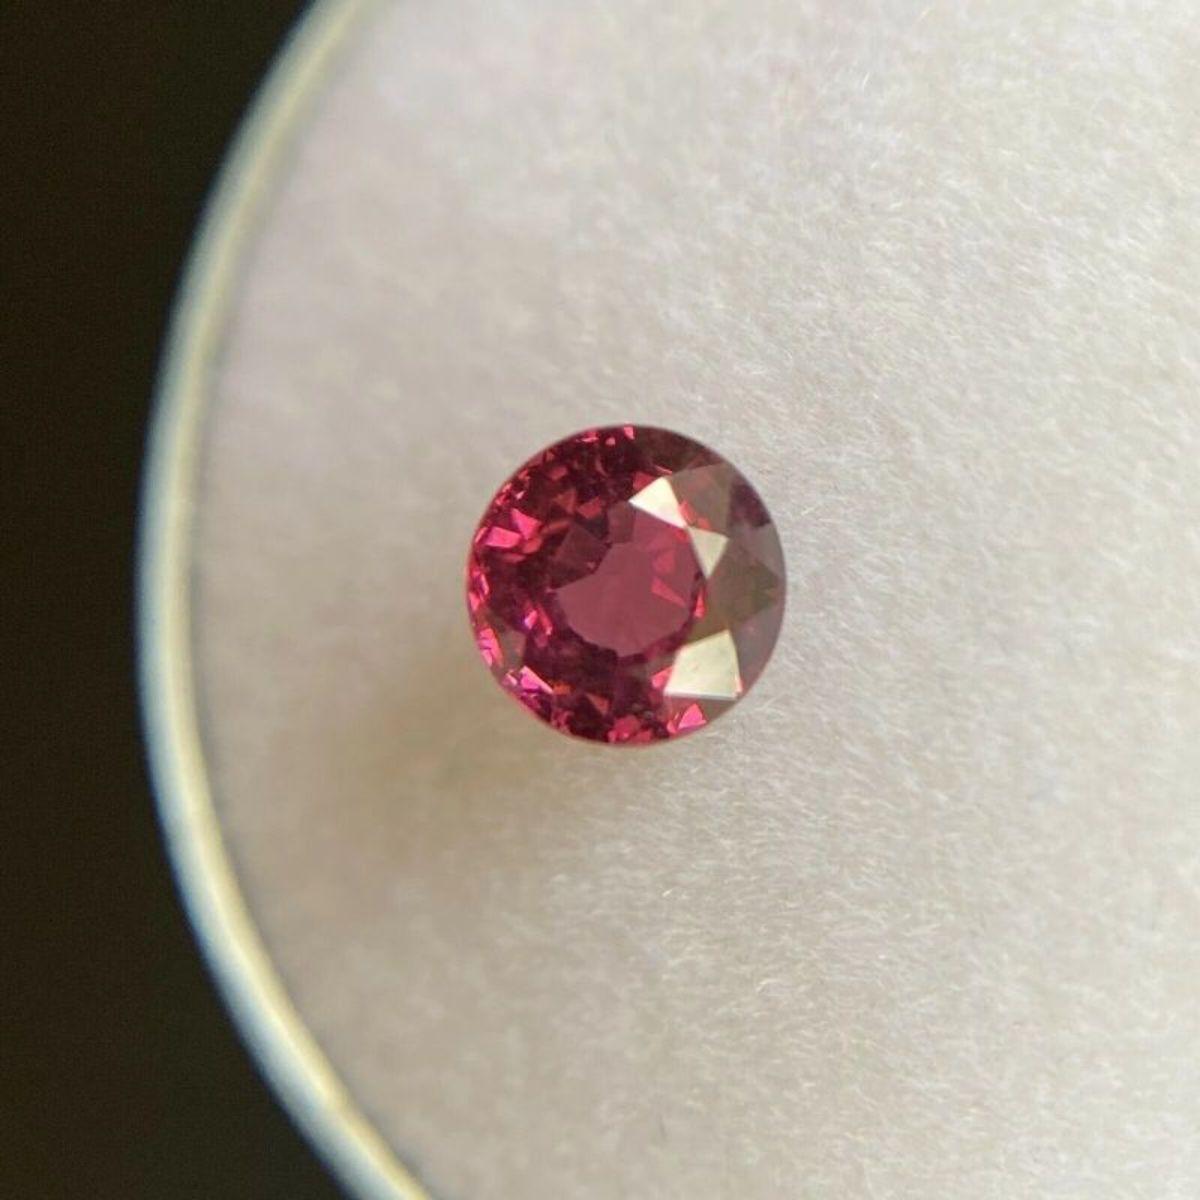 Vivid Rhodolite Garnet 5mm Red Pink Purple 0.35ct Round Diamond Cut Calibrated

Natural Vivid Red Pink-Purple Rhodolite Garnet. 
Gems approx 0.35 carat but will vary slightly. 
Sizes 5mm with +/- tolerance of approx 0.2mm. 
All have an an excellent